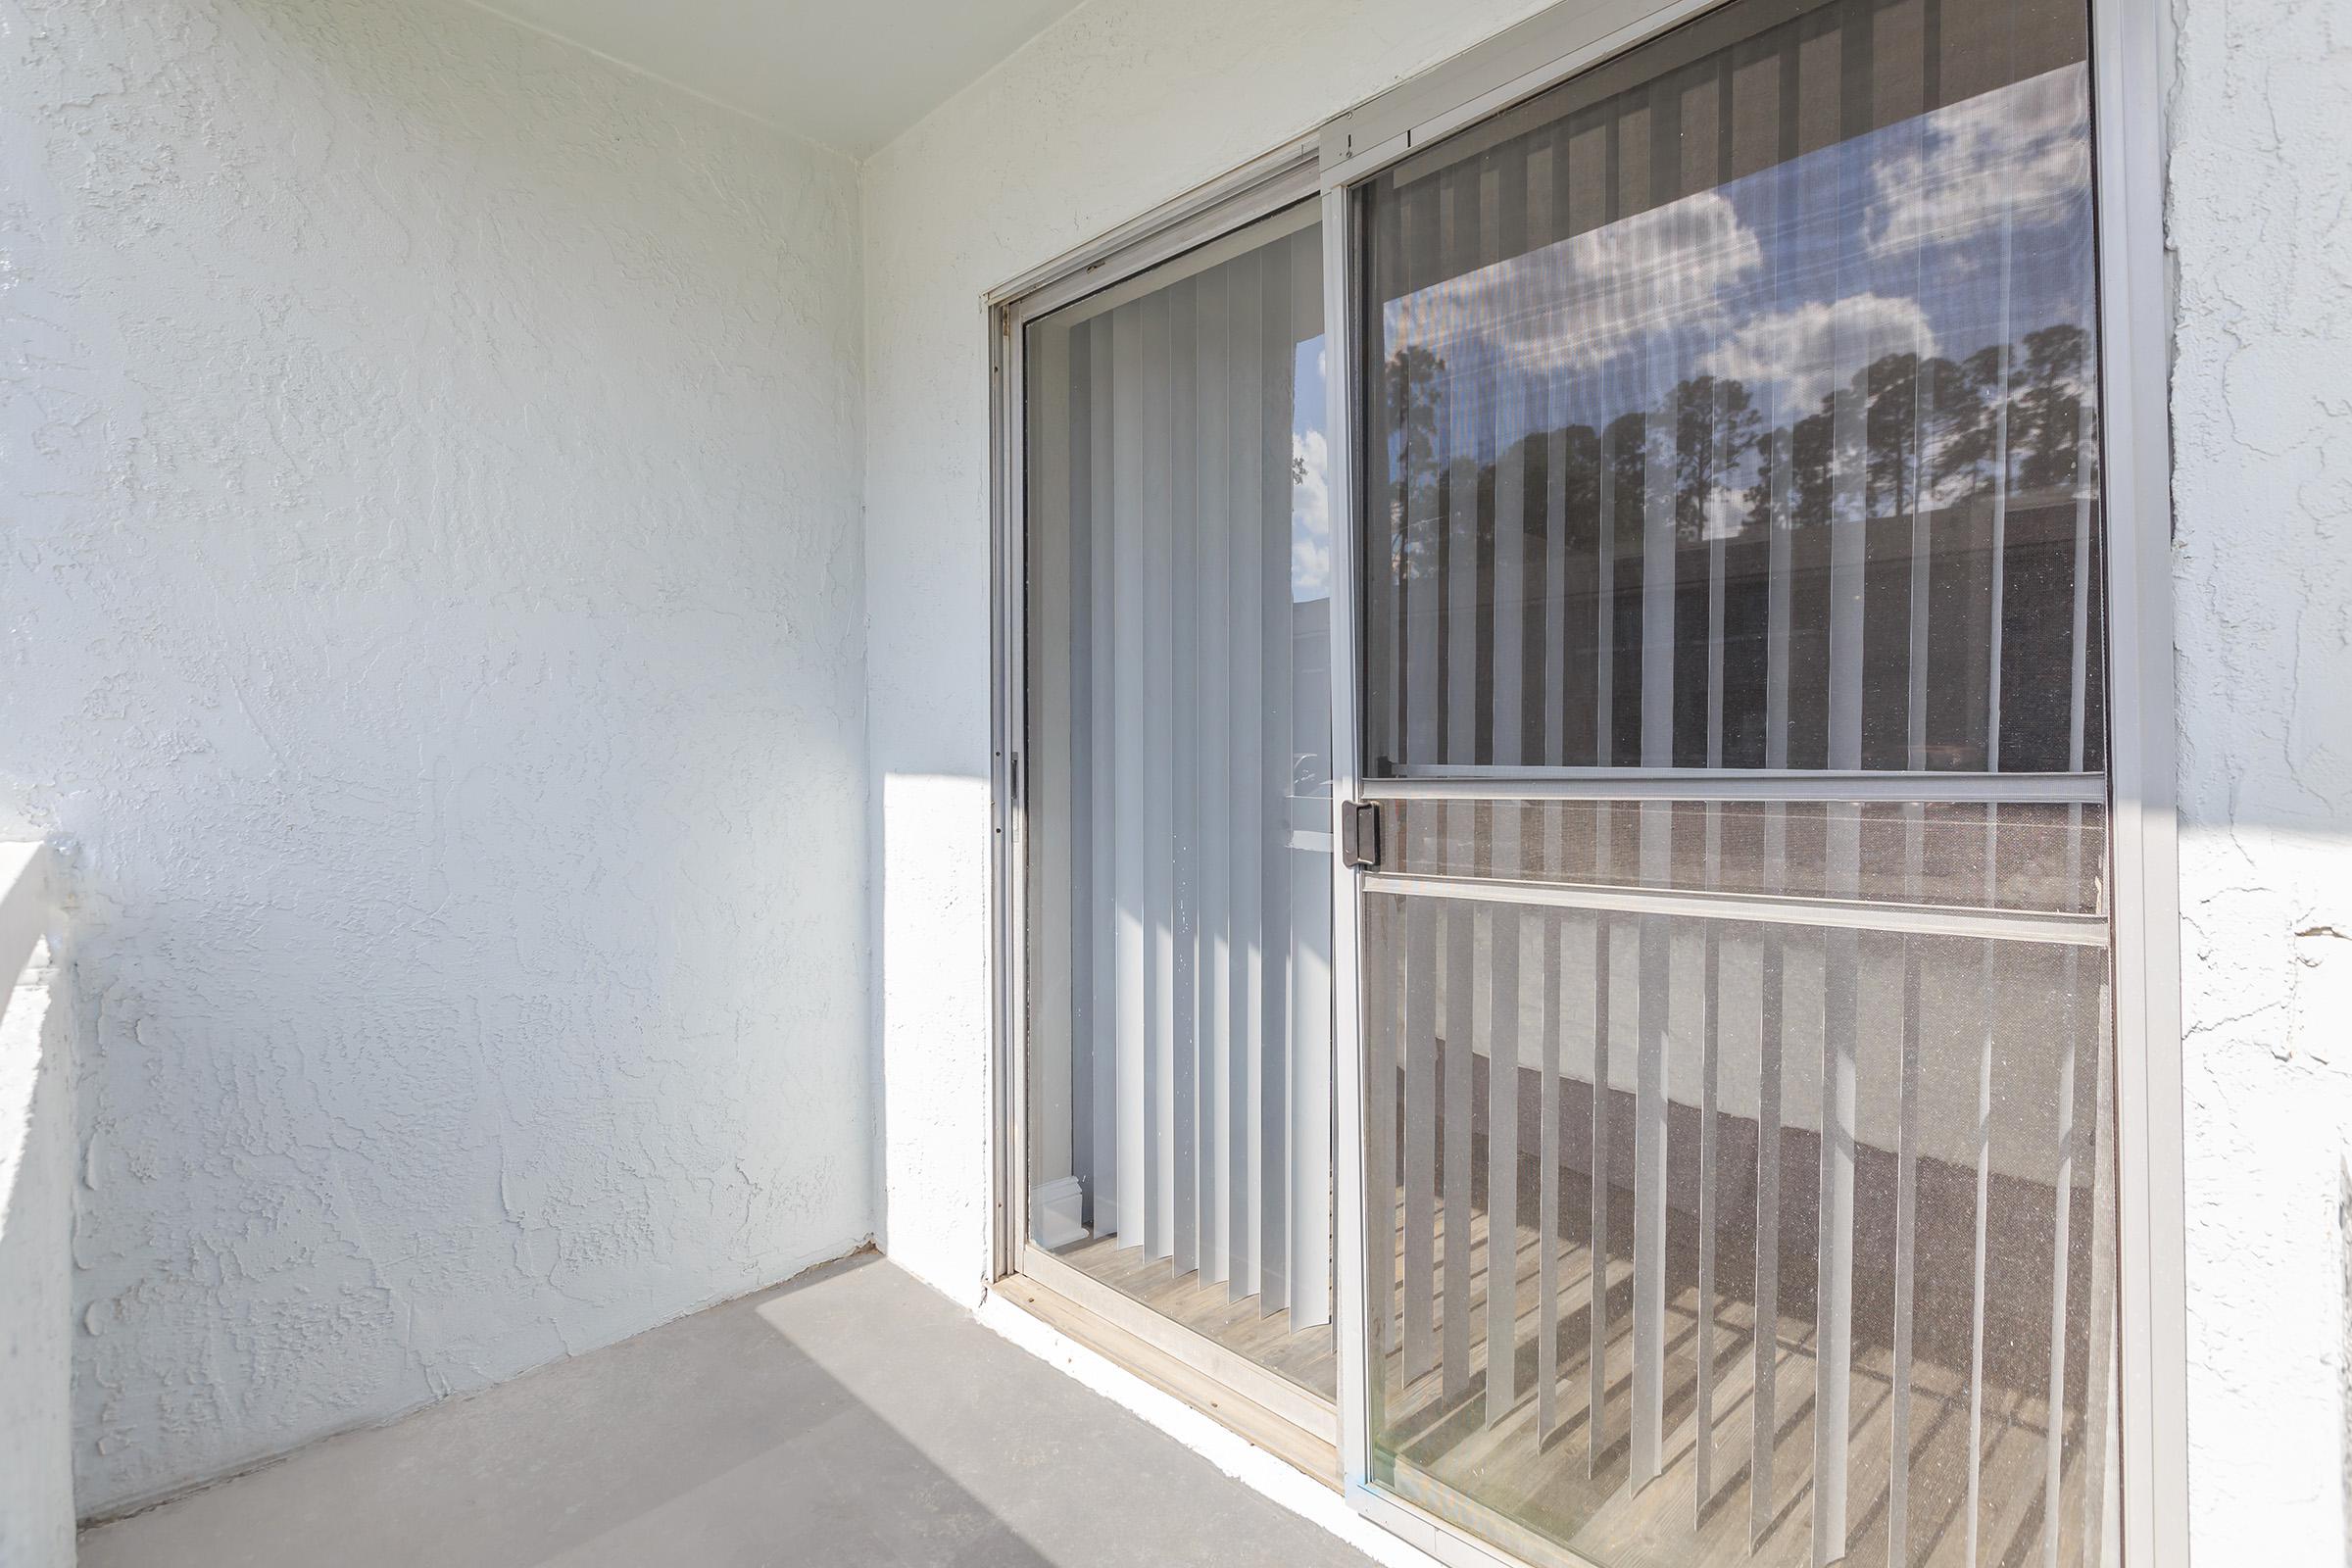 ENJOY YOUR BALCONY OR PATIO VIEW OF JACKSONVILLE, FL.